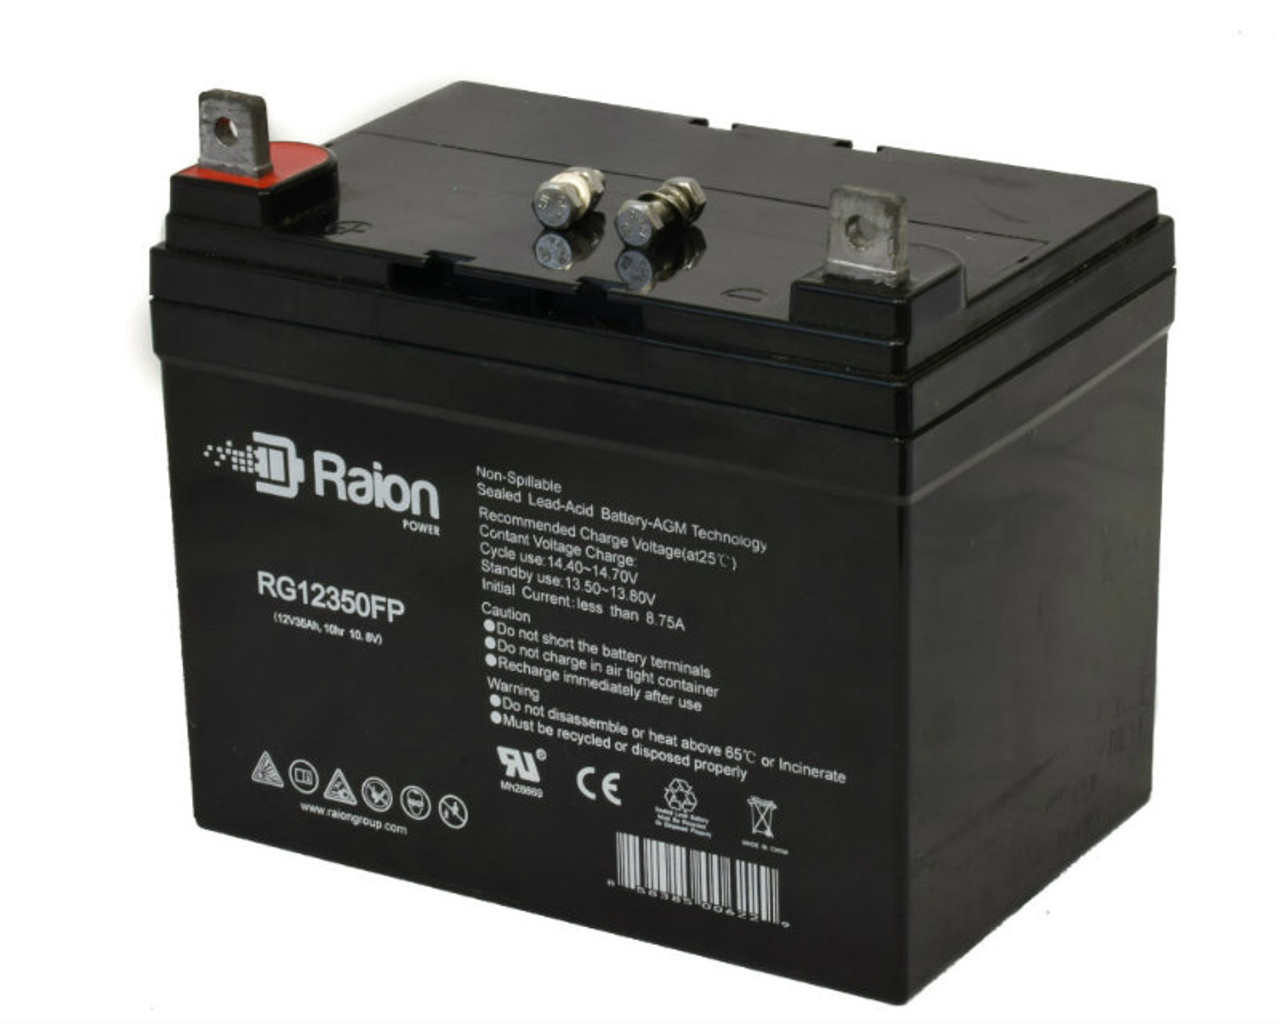 Raion Power Replacement 12V 35Ah RG12350FP Mobility Scooter Battery for Golden Technologies Companion GC223